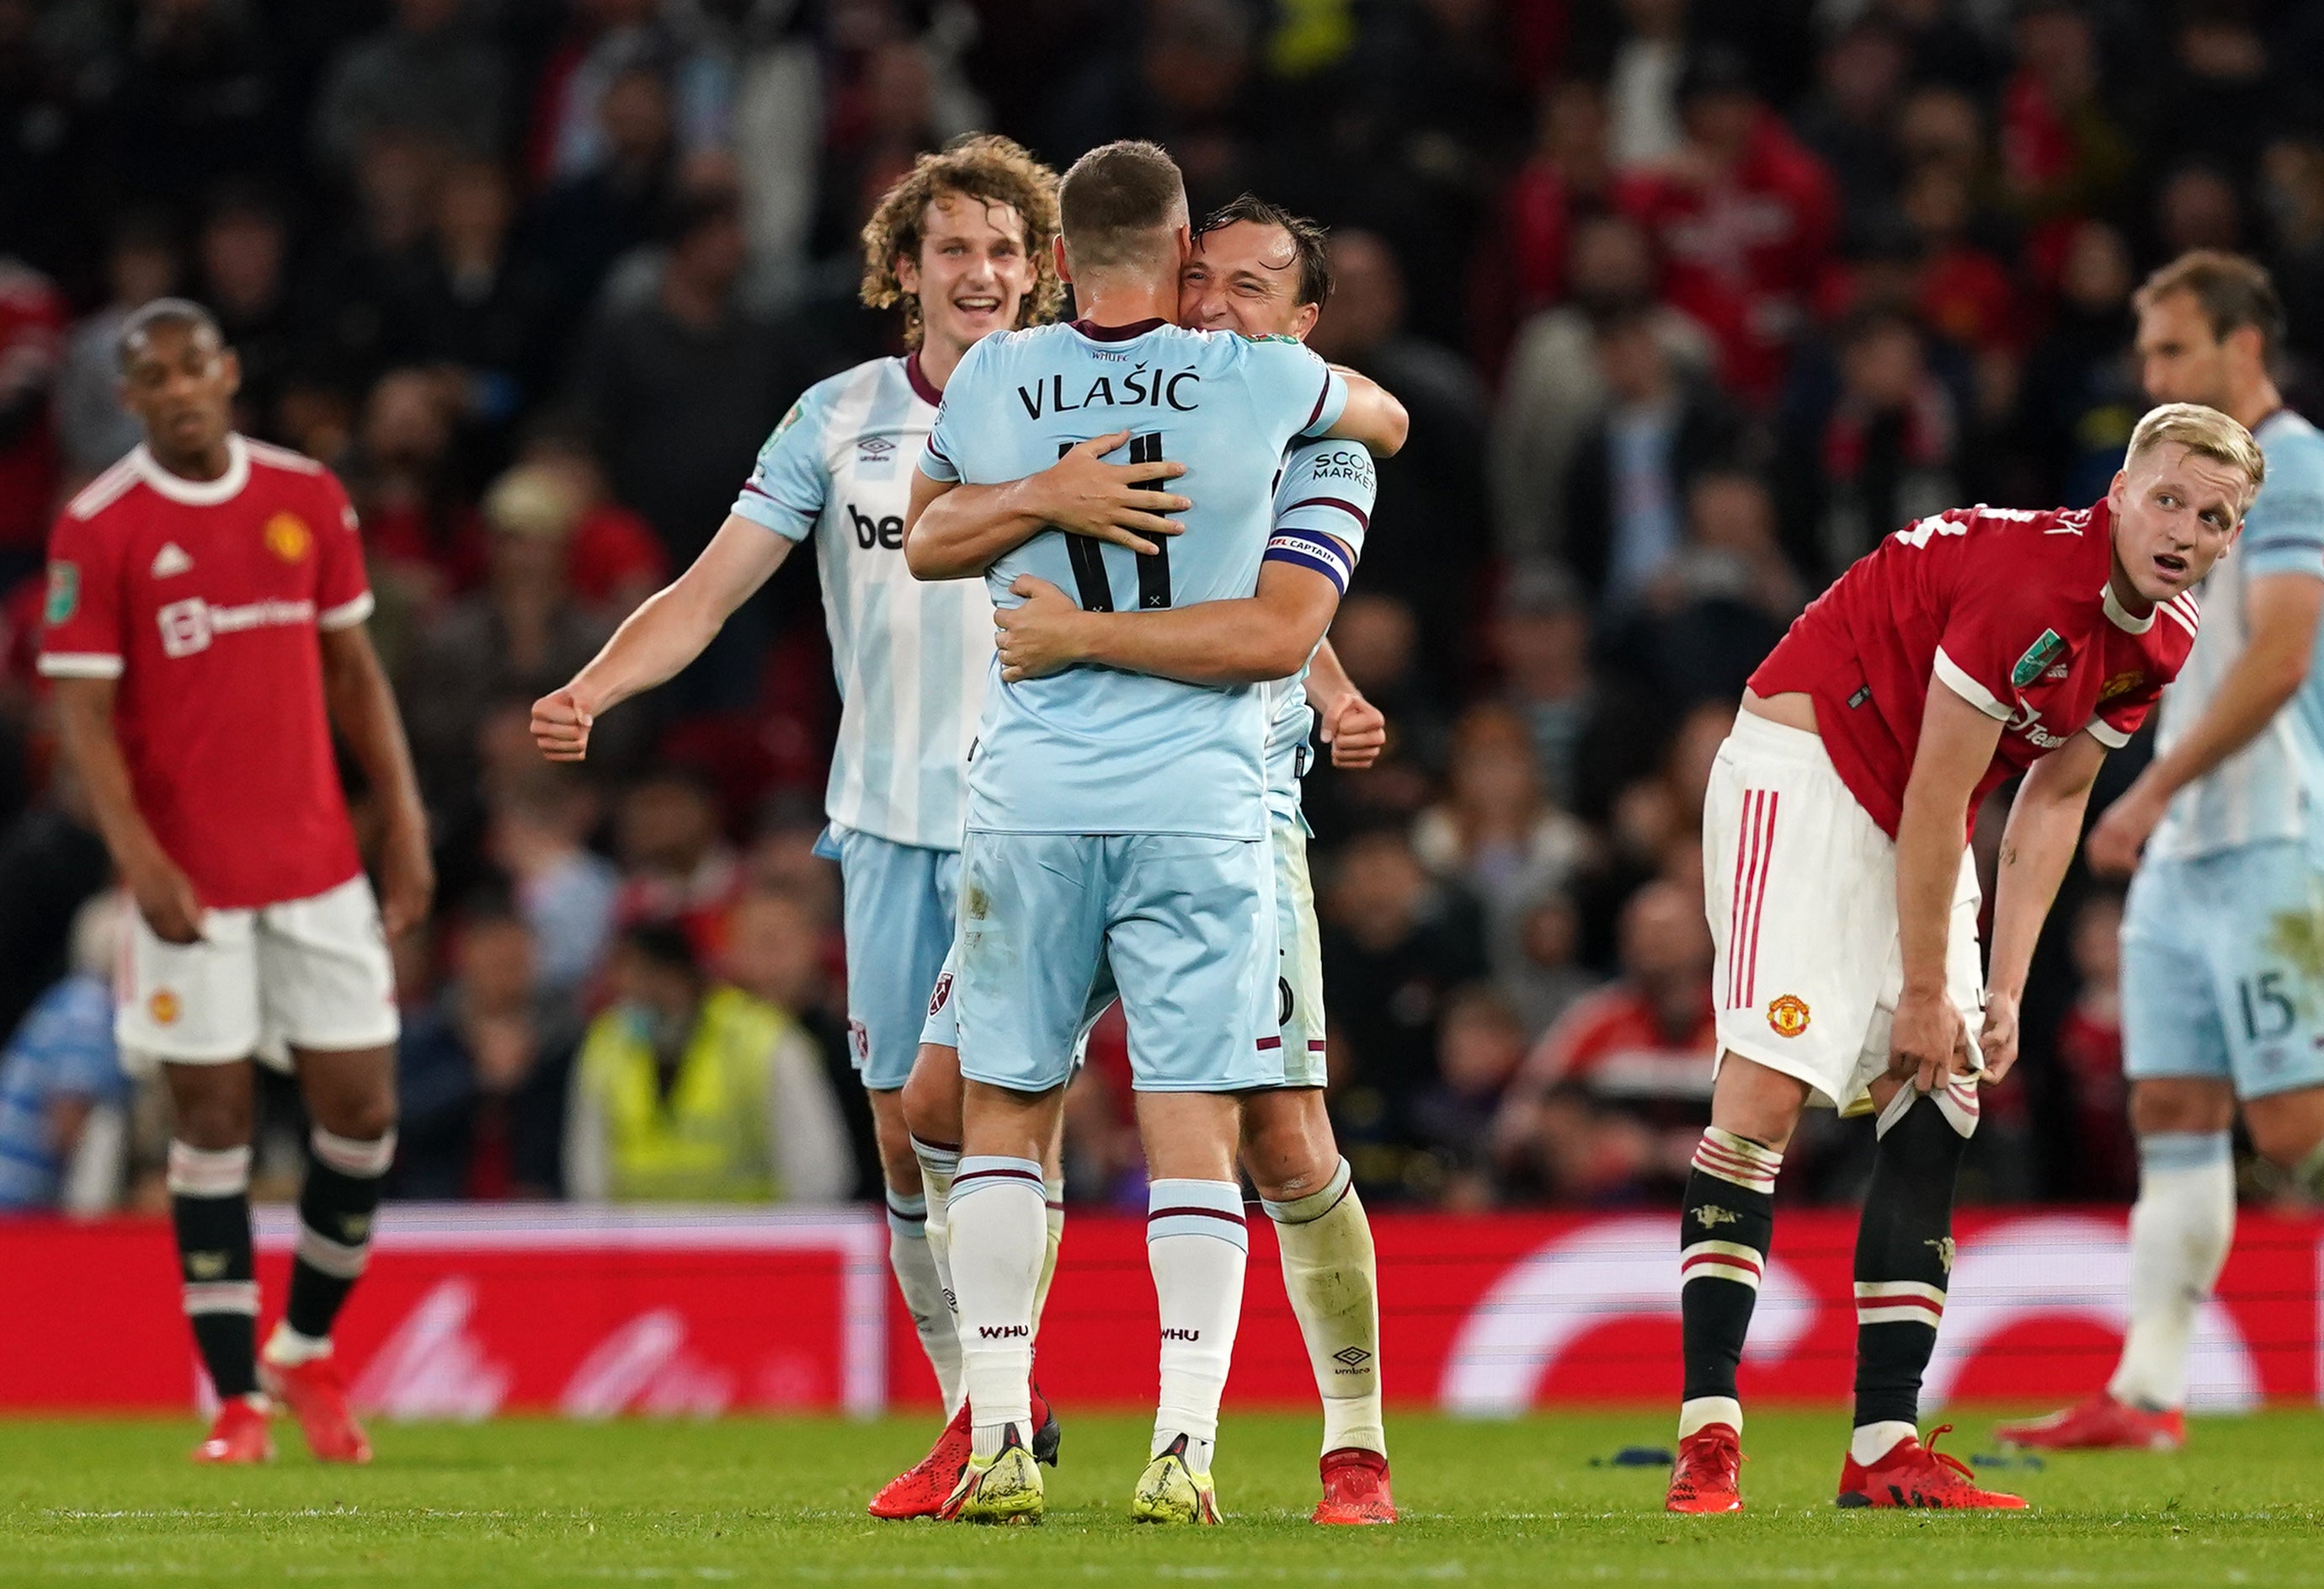 West Ham dumped Manchester United out of the Carabao Cup (Martin Rickett/PA)